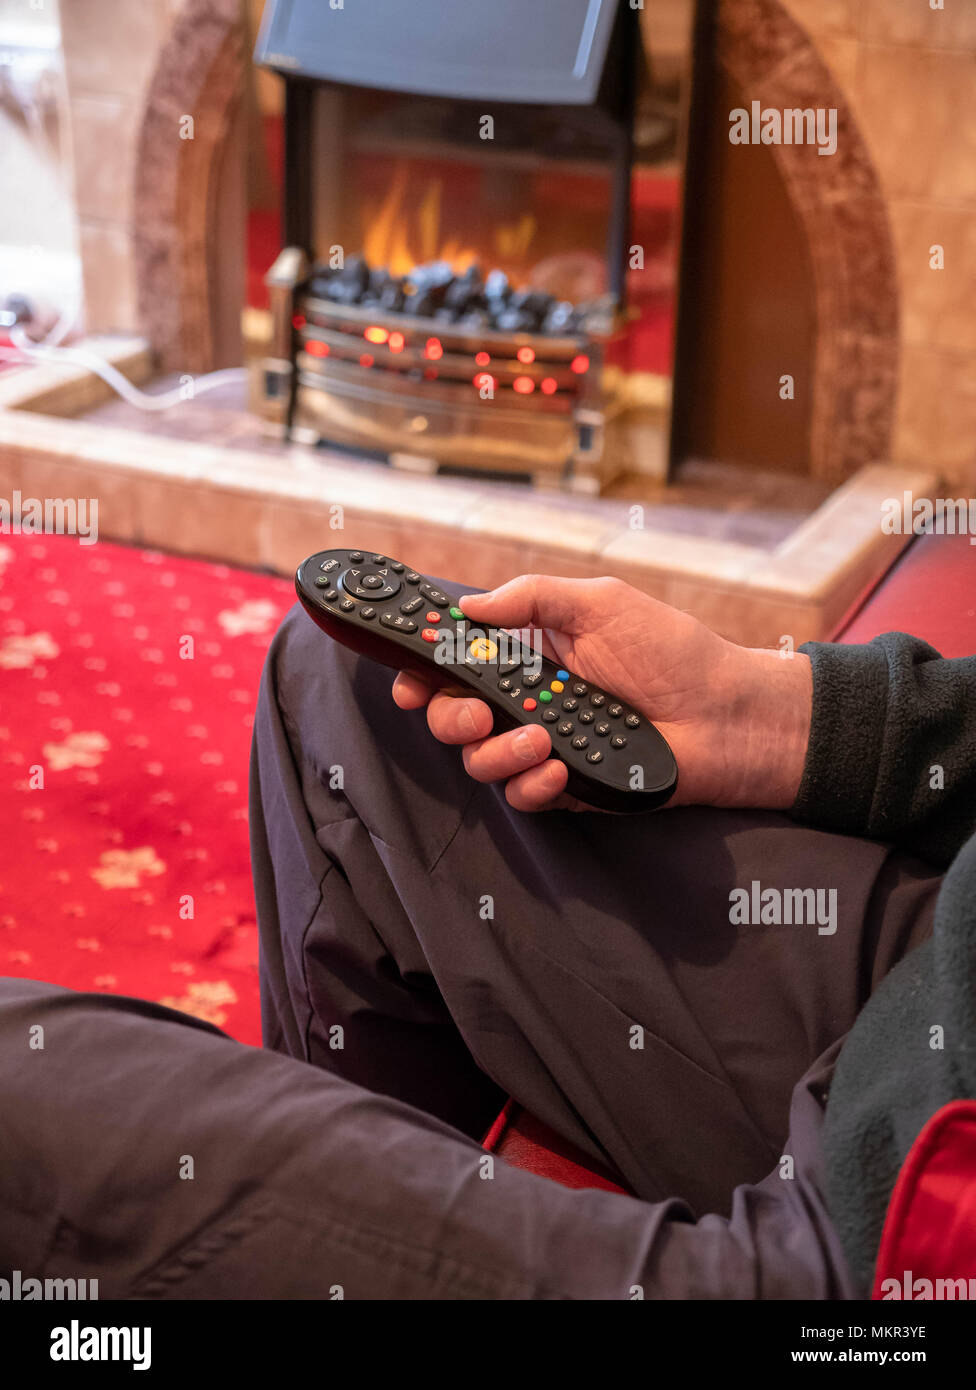 Mature man, living alone, with tv remote control in hand Stock Photo